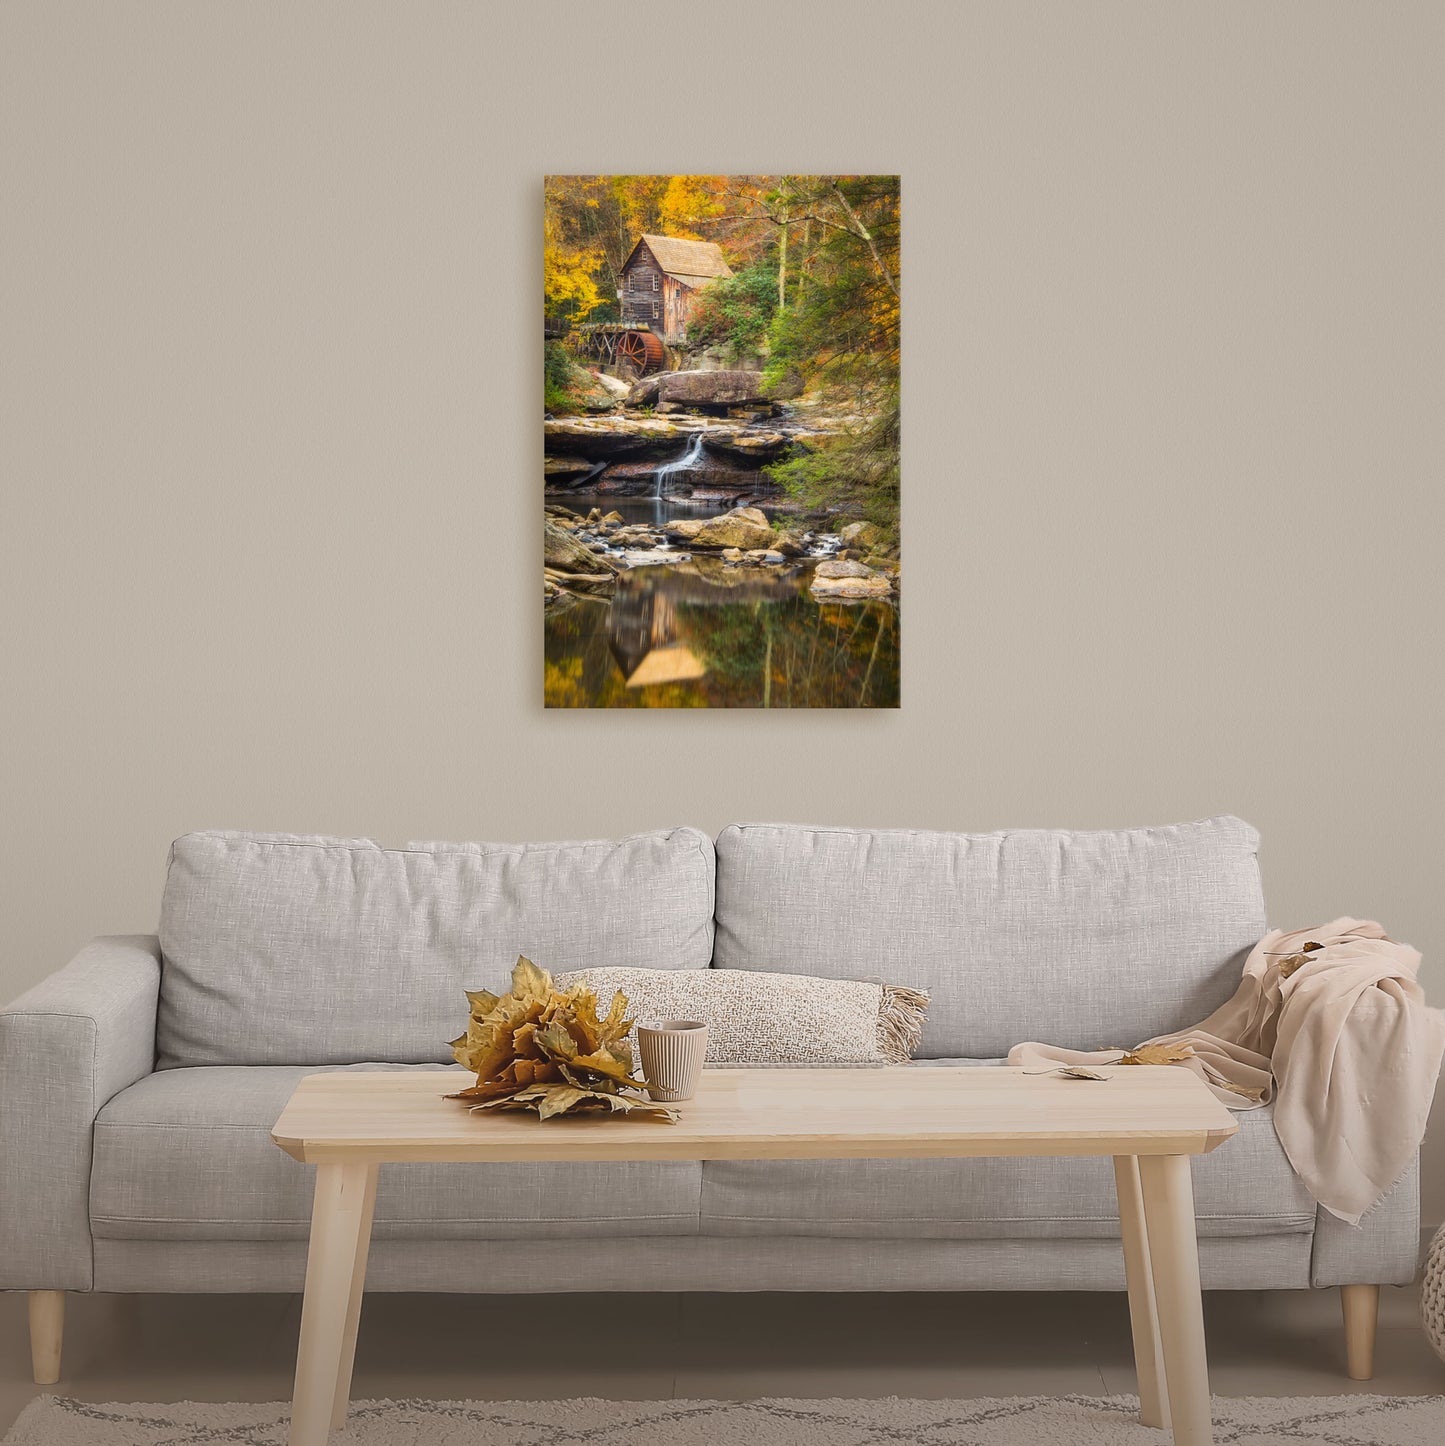 High-quality photograph of Glade Creek Grist Mill in West Virginia, printed on premium canvas with vibrant colors.